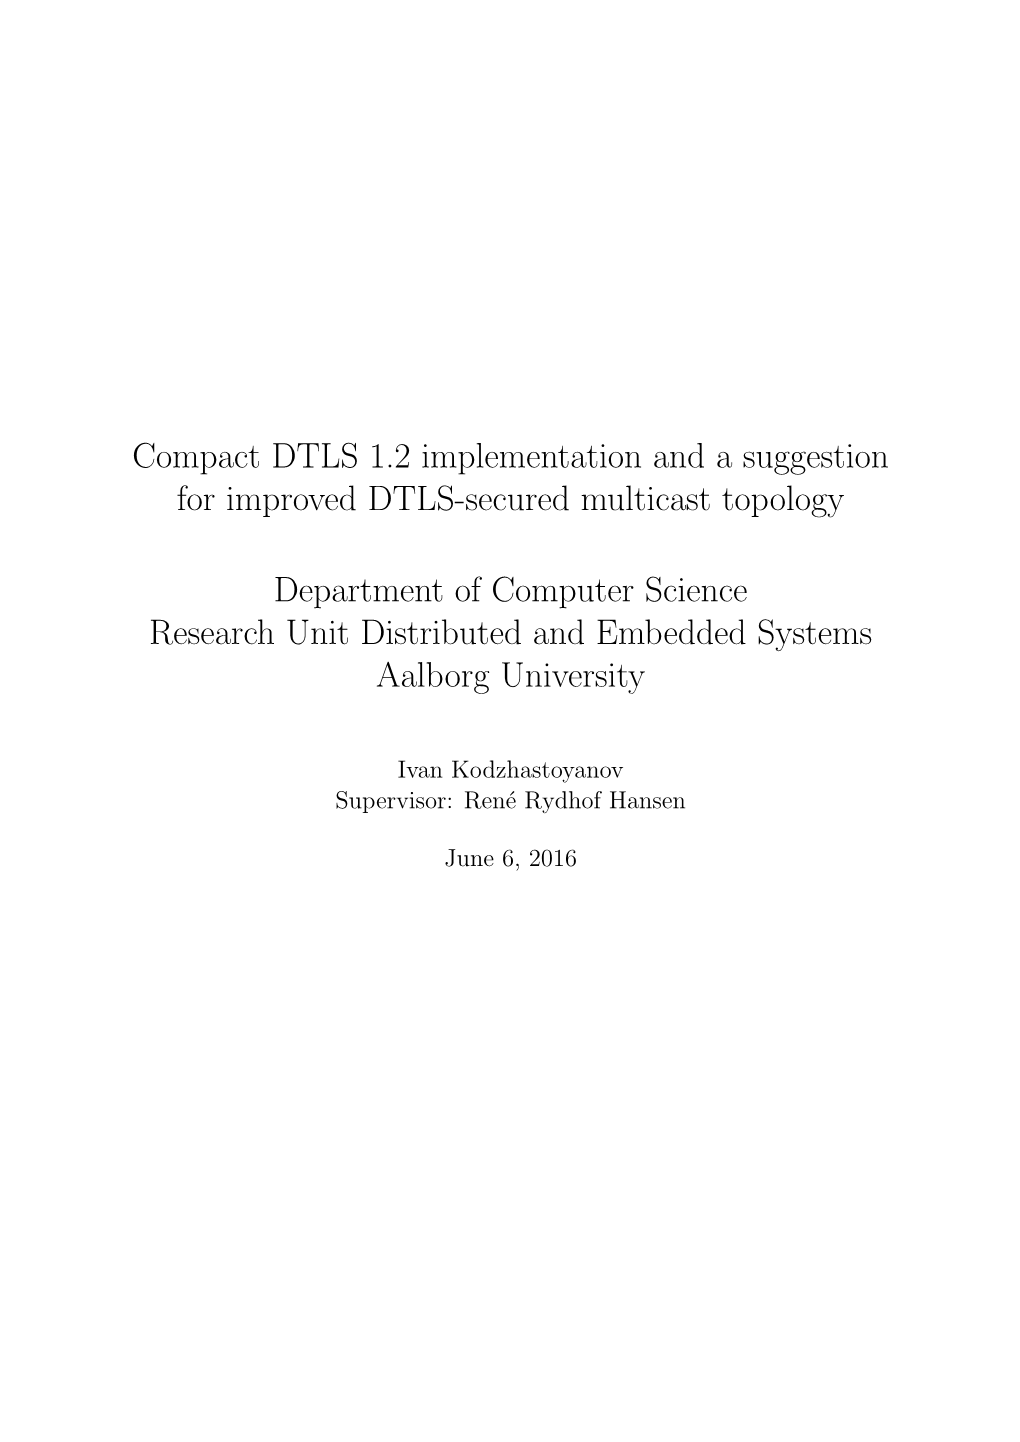 Compact DTLS 1.2 Implementation and a Suggestion for Improved DTLS-Secured Multicast Topology